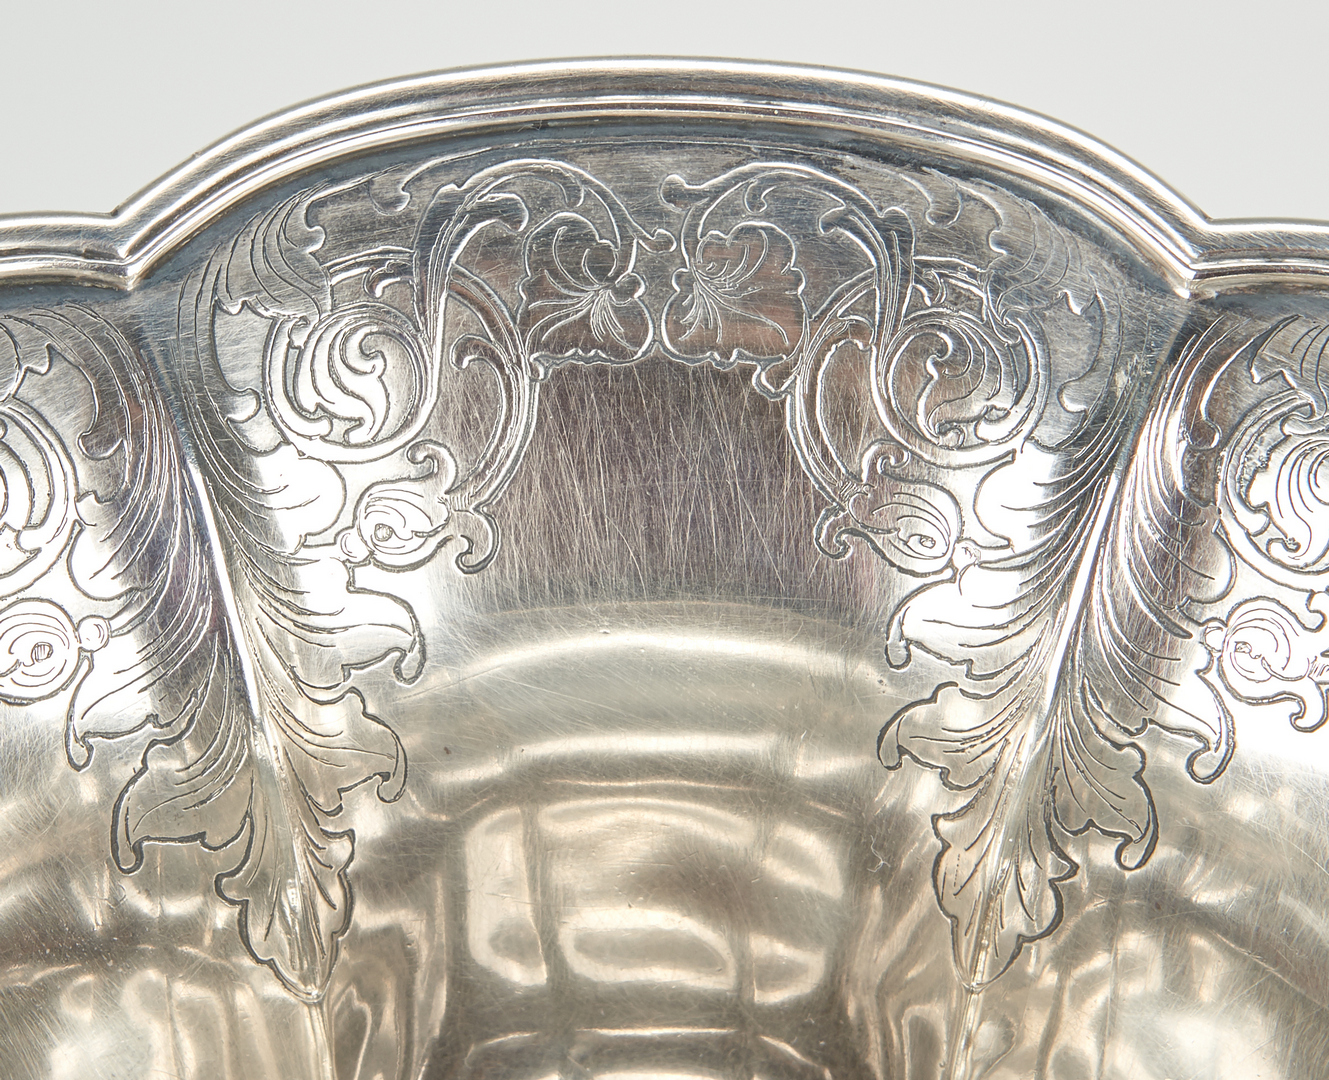 Lot 755: Tiffany & Co. Art Nouveau Sterling Silver Footed Bowl